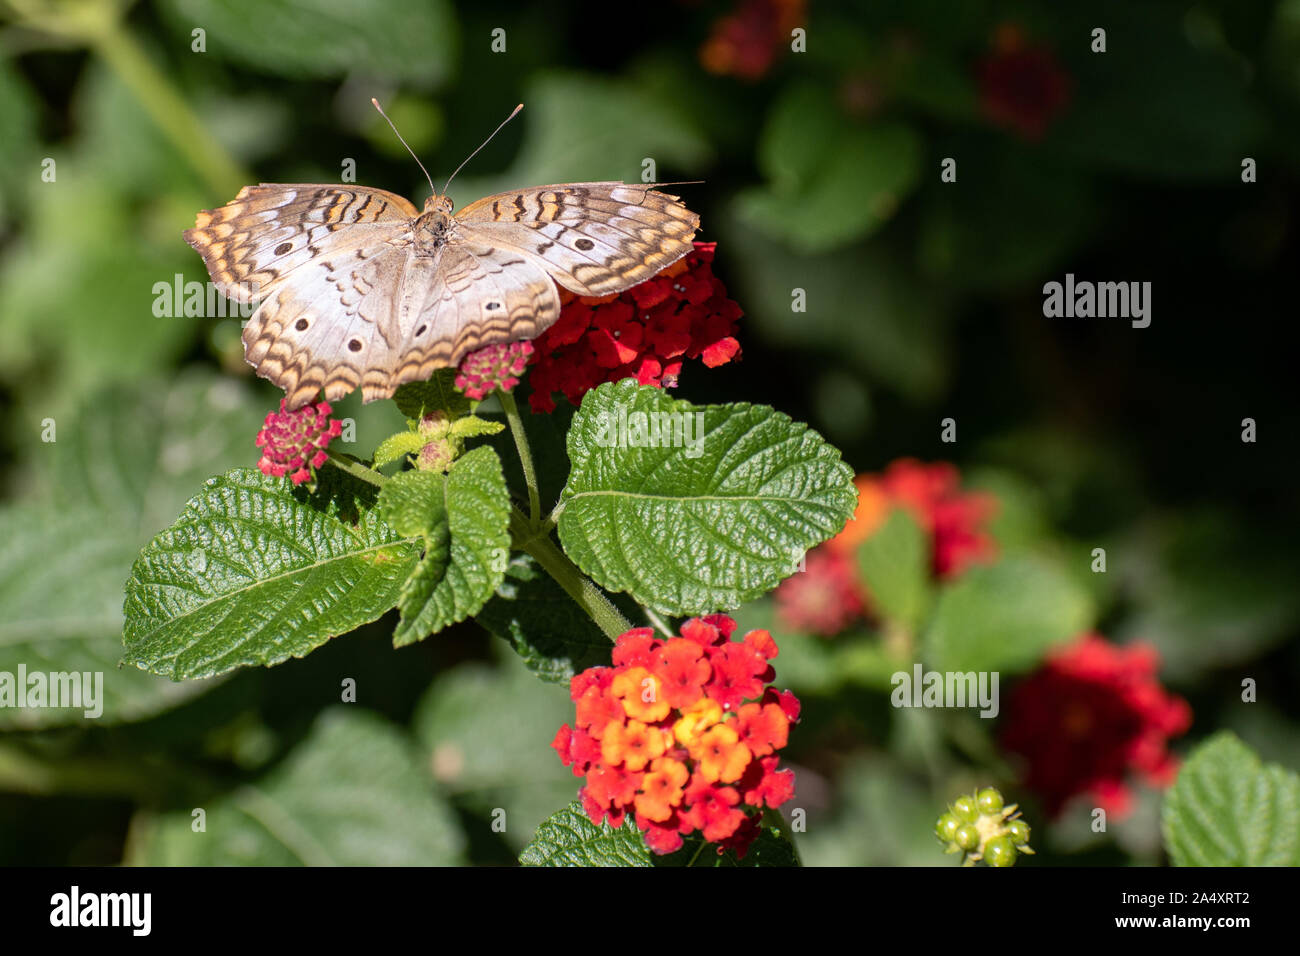 Brown and white butterfly with flowers Stock Photo